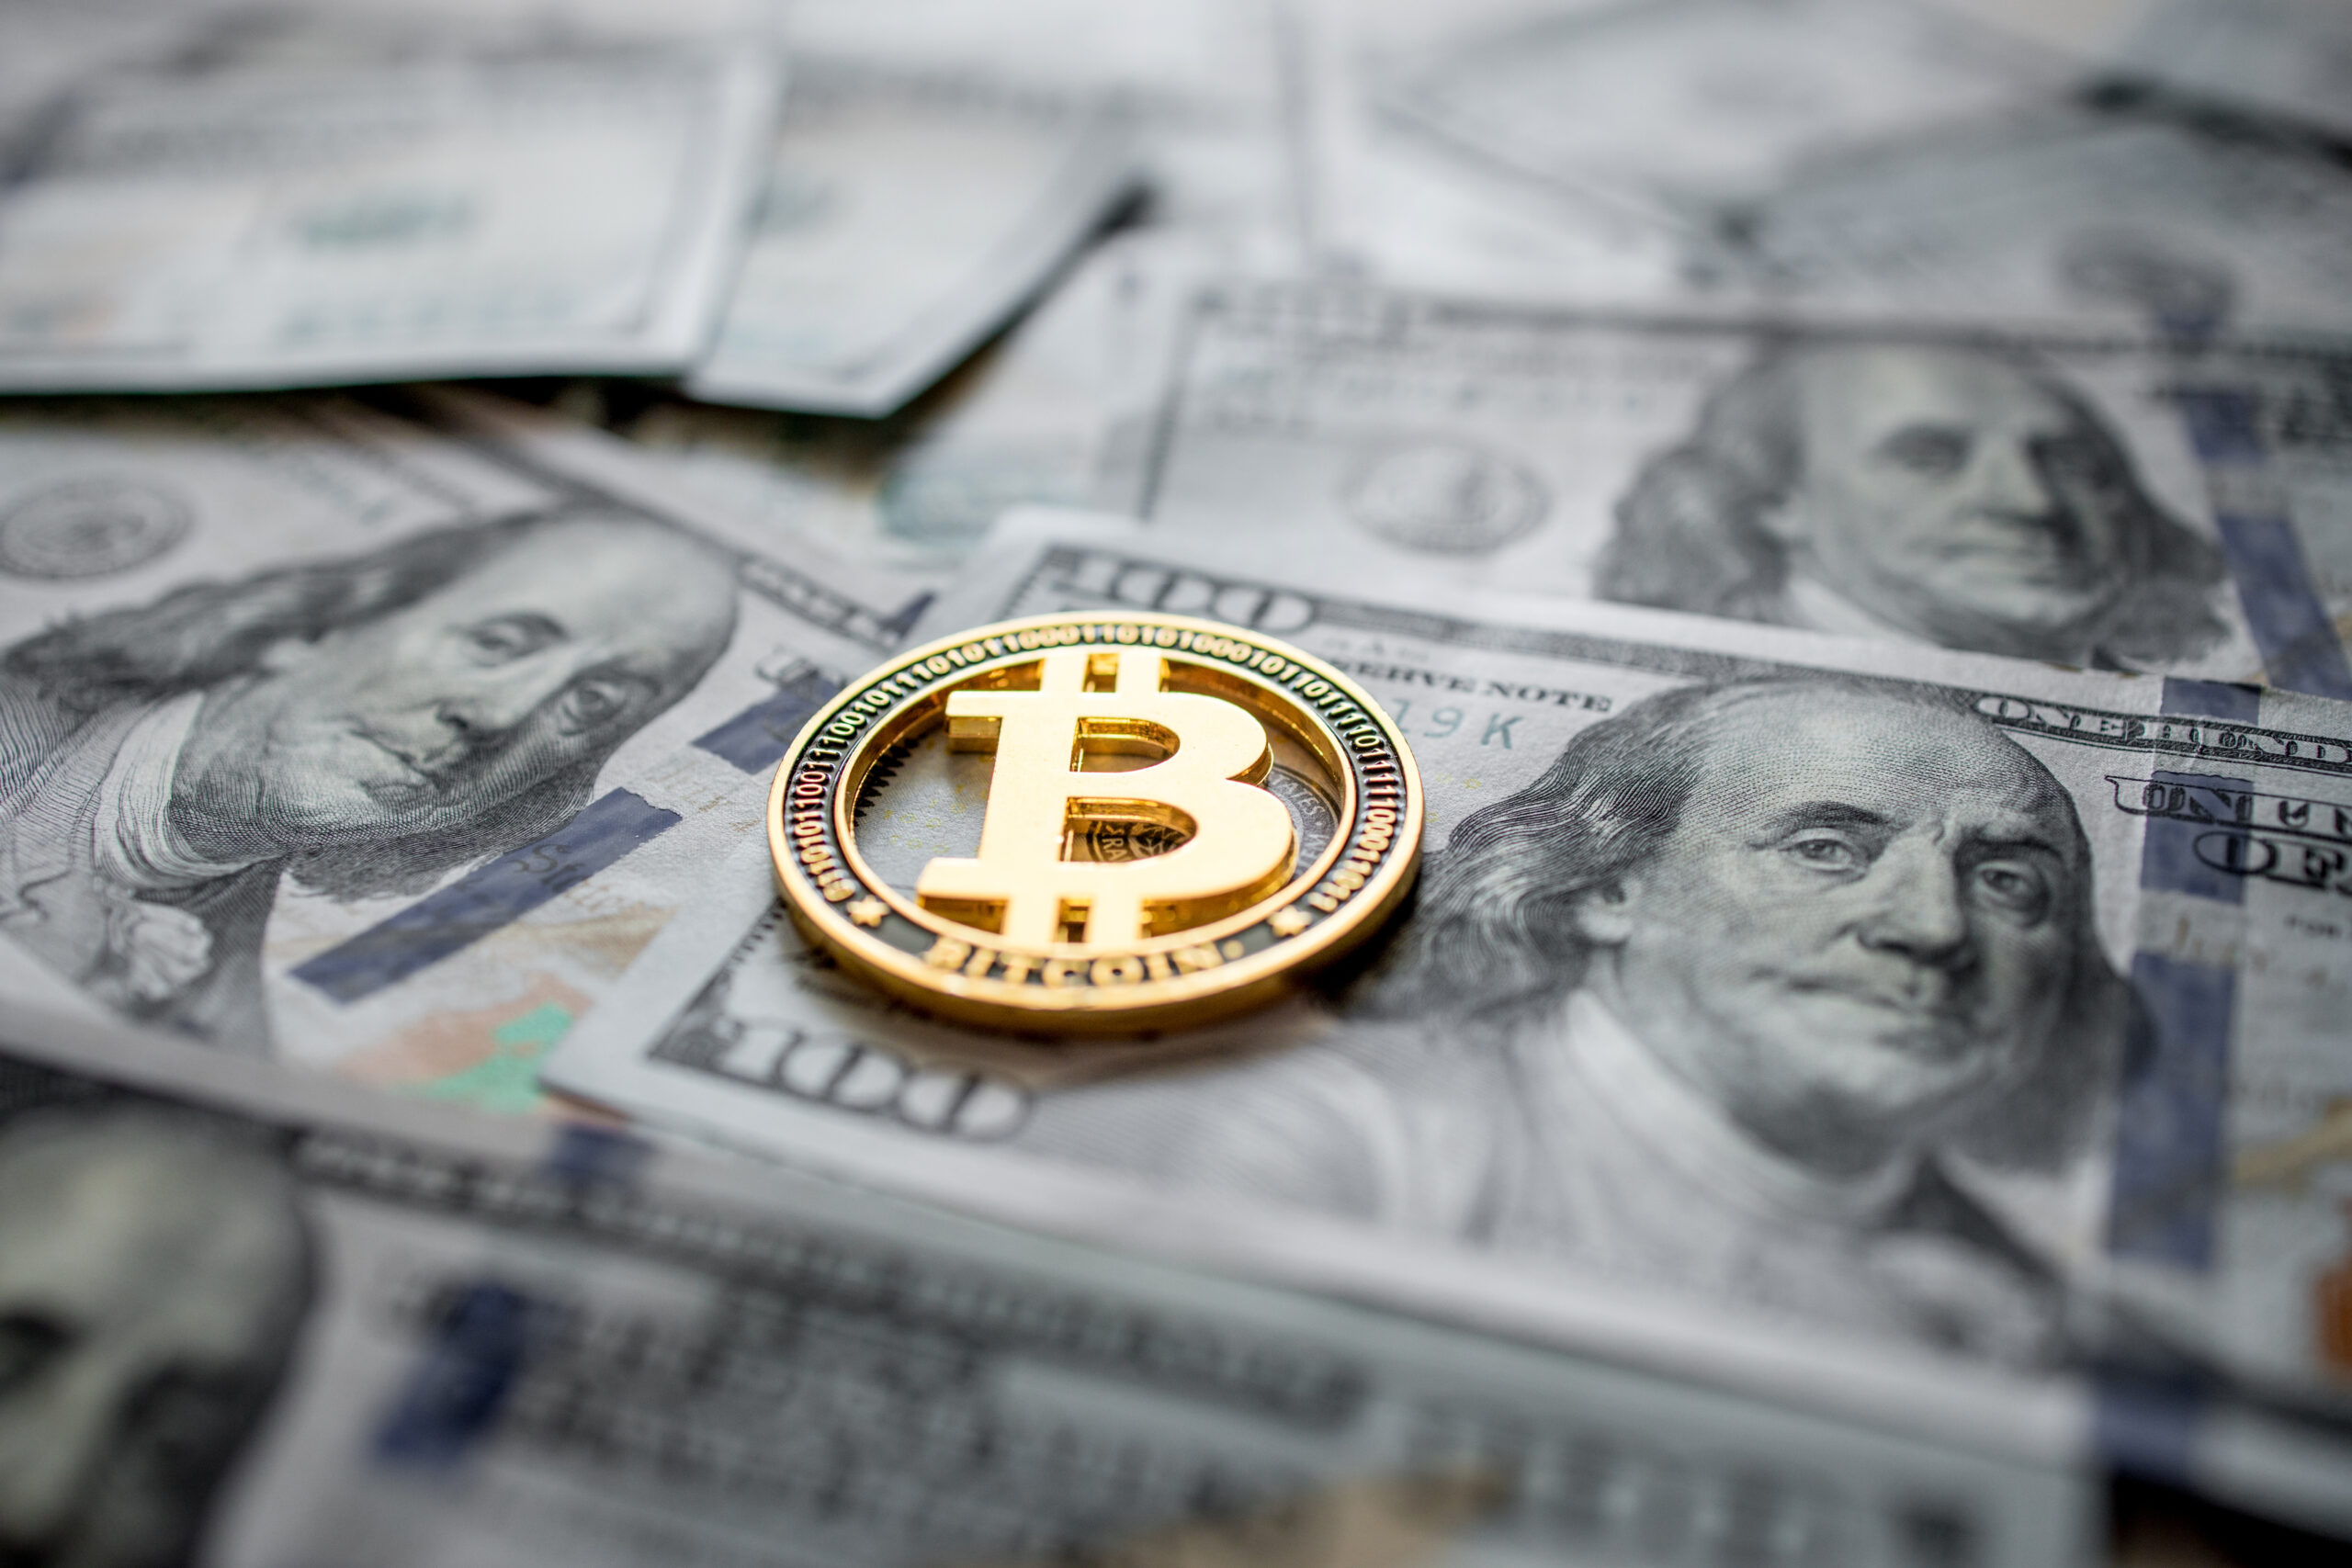 Geek insider, geekinsider, geekinsider. Com,, understanding withdrawal fees and transaction times for bitcoin savings, crypto currency